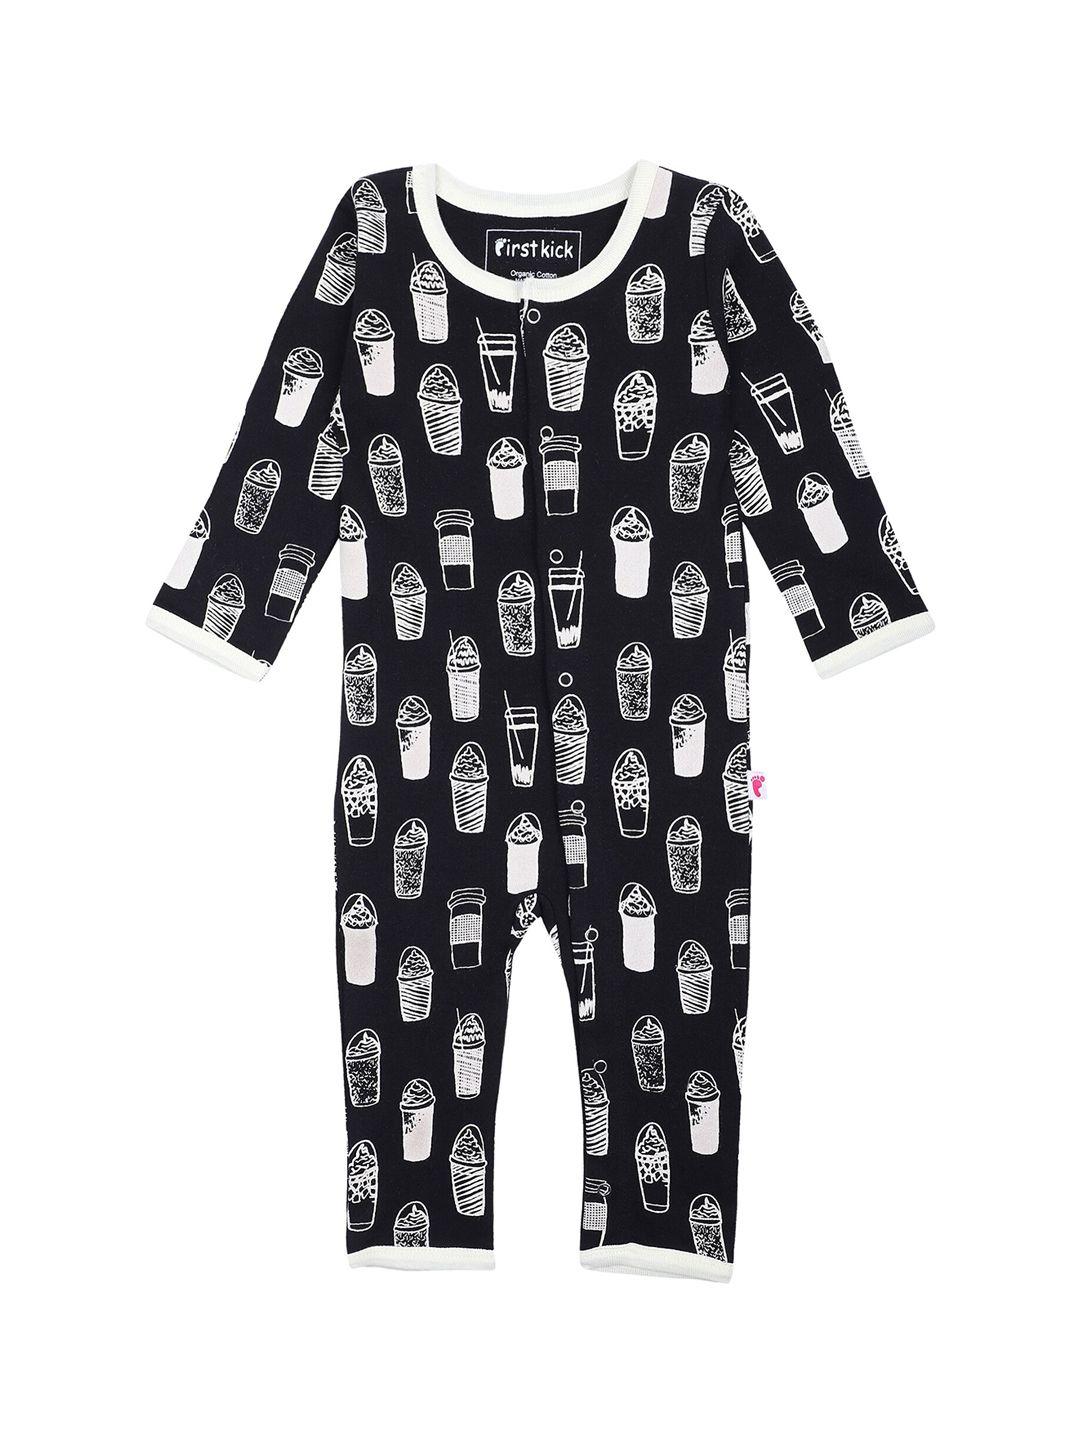 first kick infants black & white printed organic cotton rompers